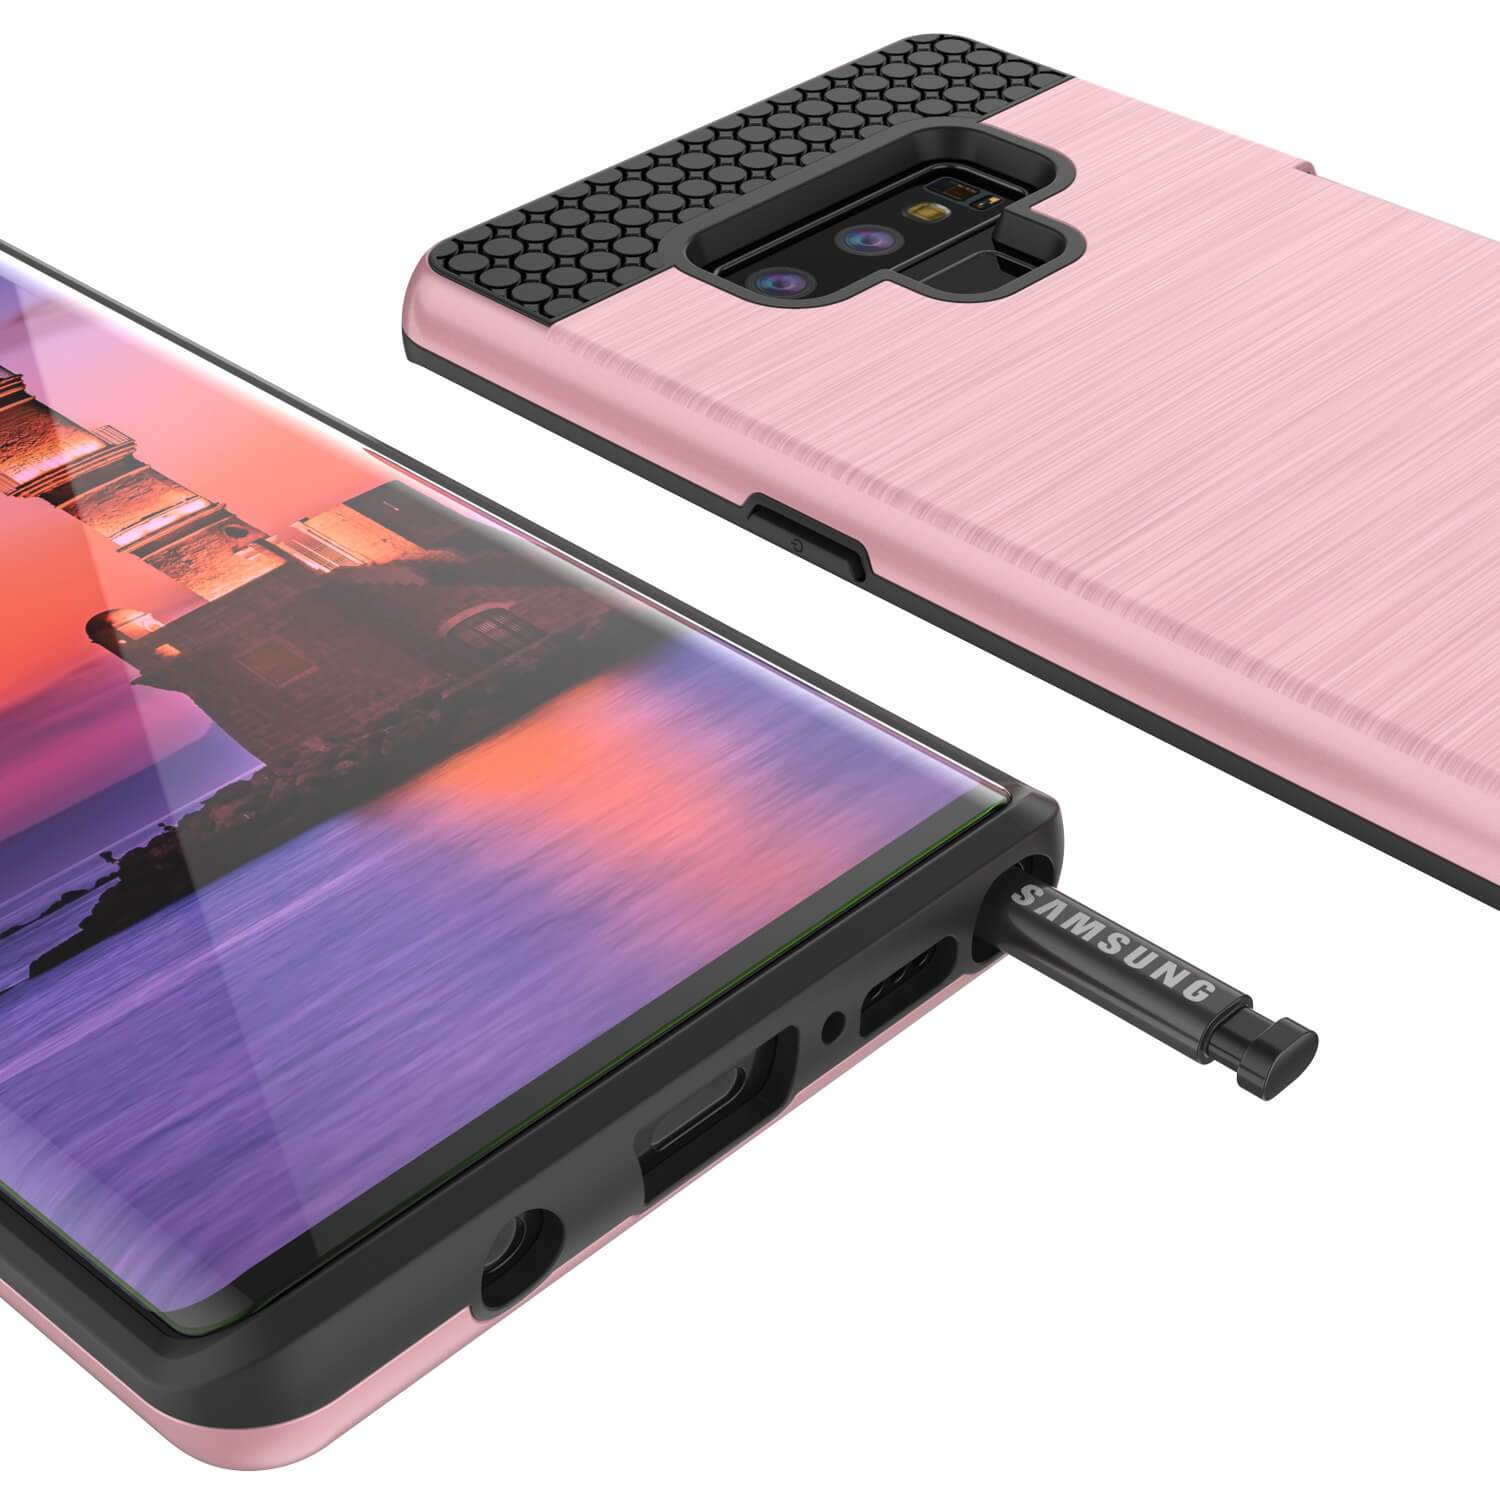 Galaxy Note 9 Case, Punkcase [SLOT Series] Slim Fit Cover [Rose Gold]